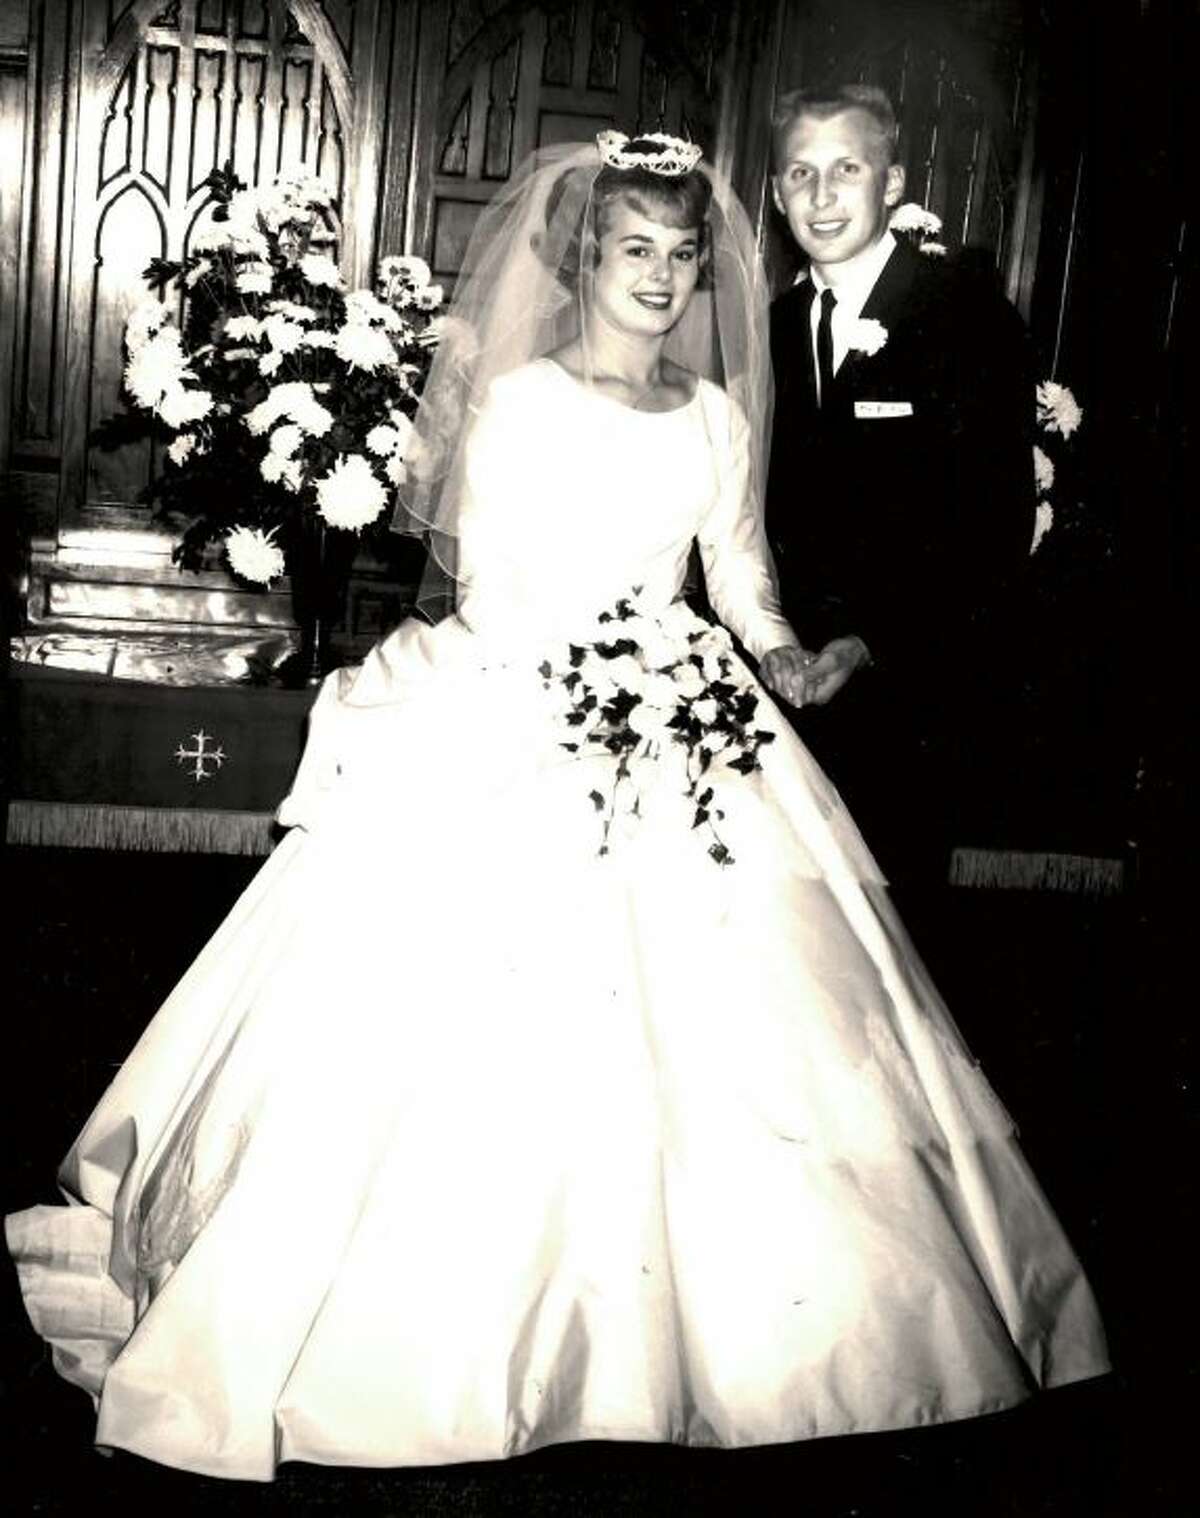 Michael and Barbara Beaber at their wedding